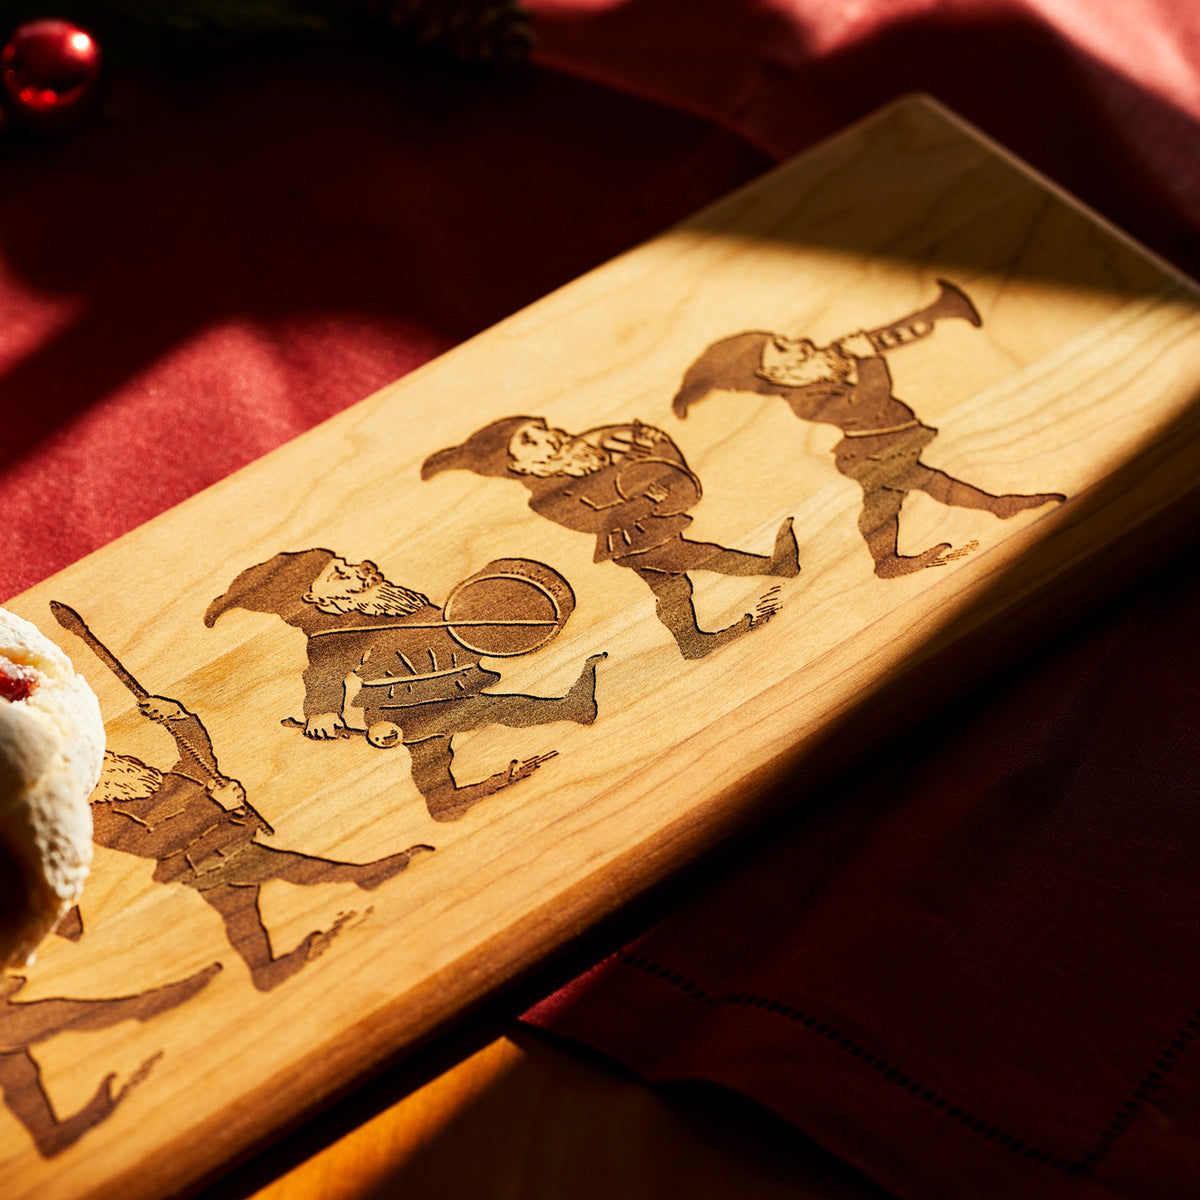 A Caskata Elves Serving Board with a picture of a holiday whimsy group of gnomes.